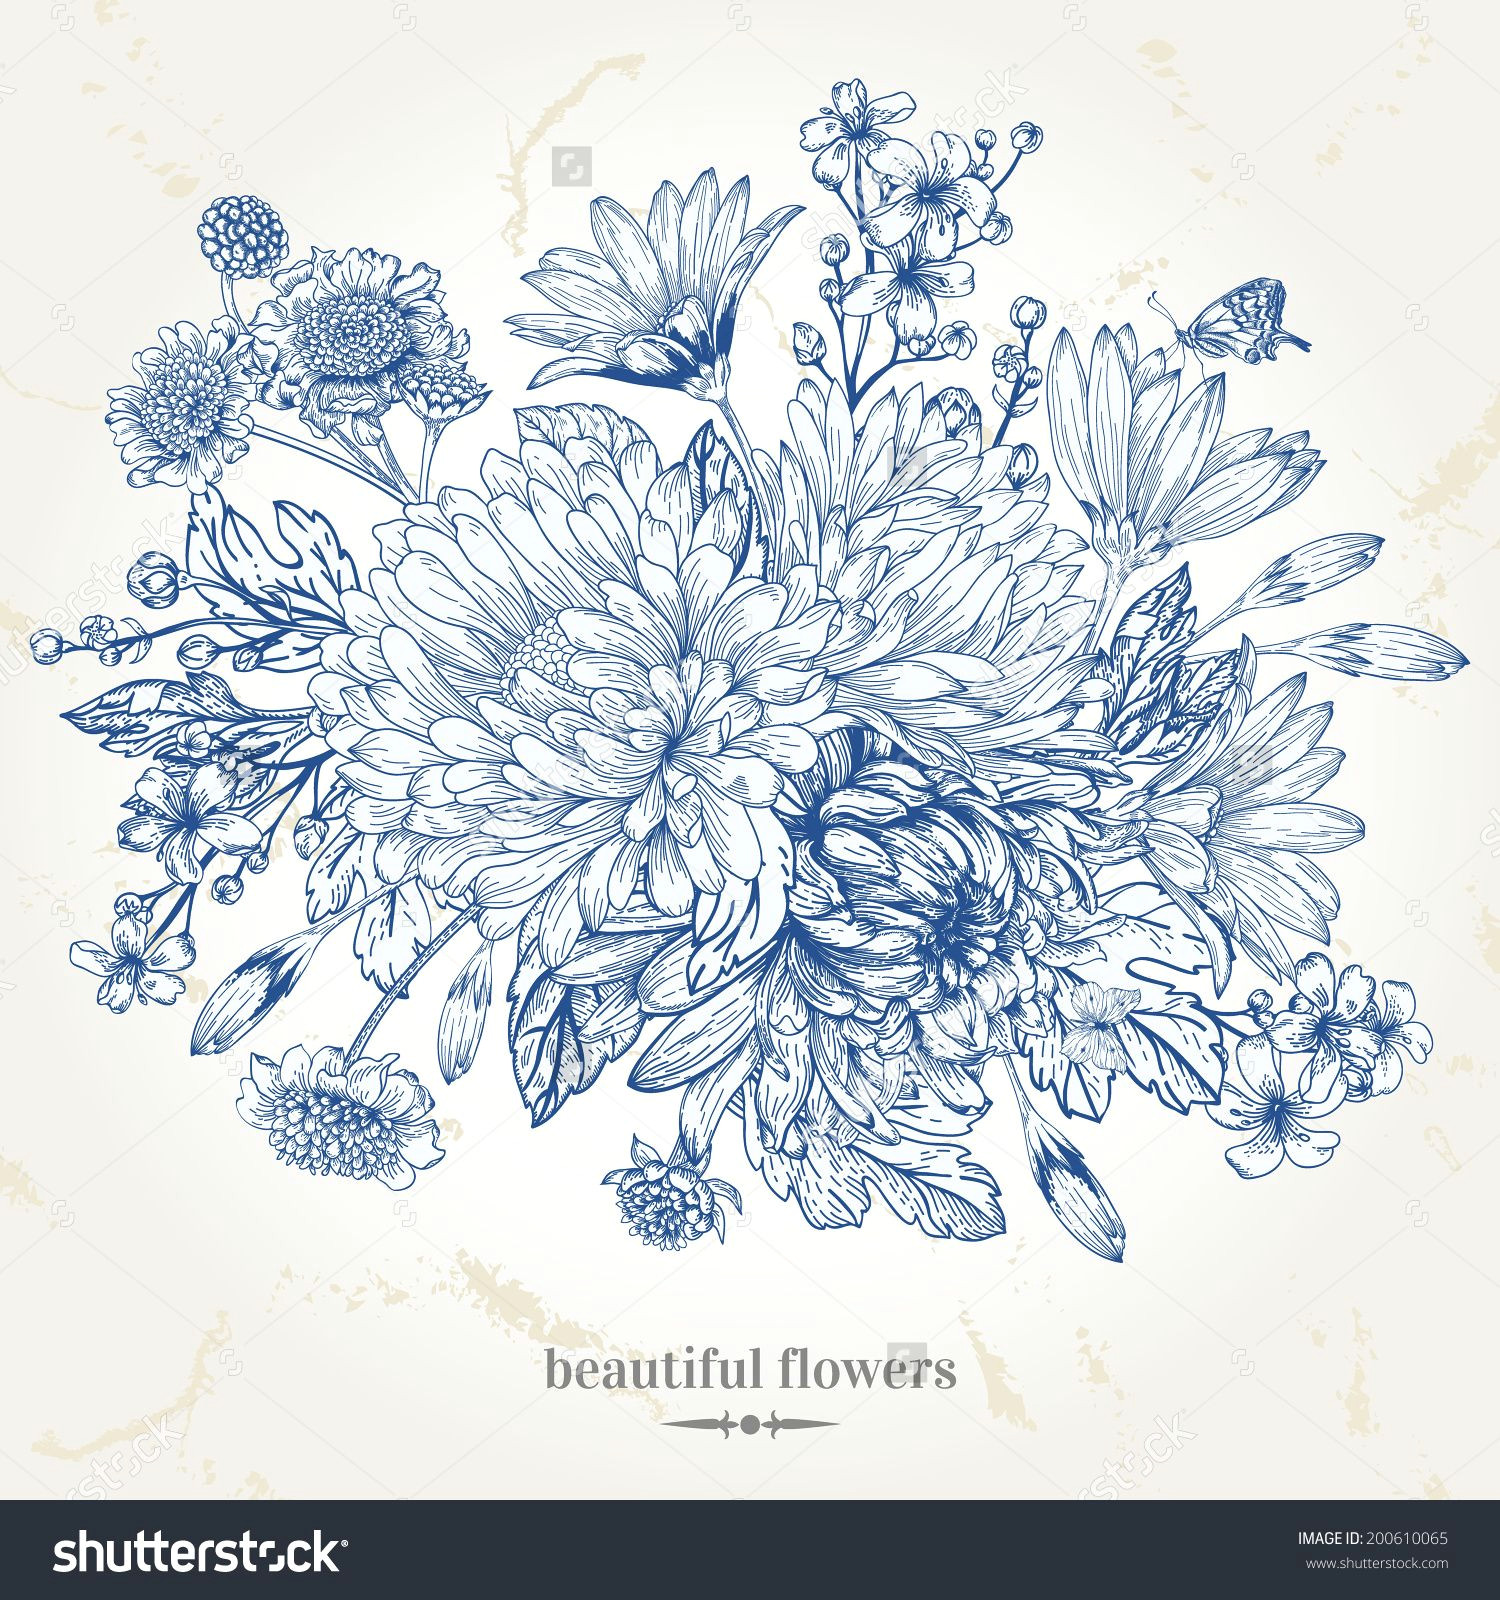 Drawing Flowers for Cards Pin by asmaa Malallah On Board Drawings Flowers Illustration